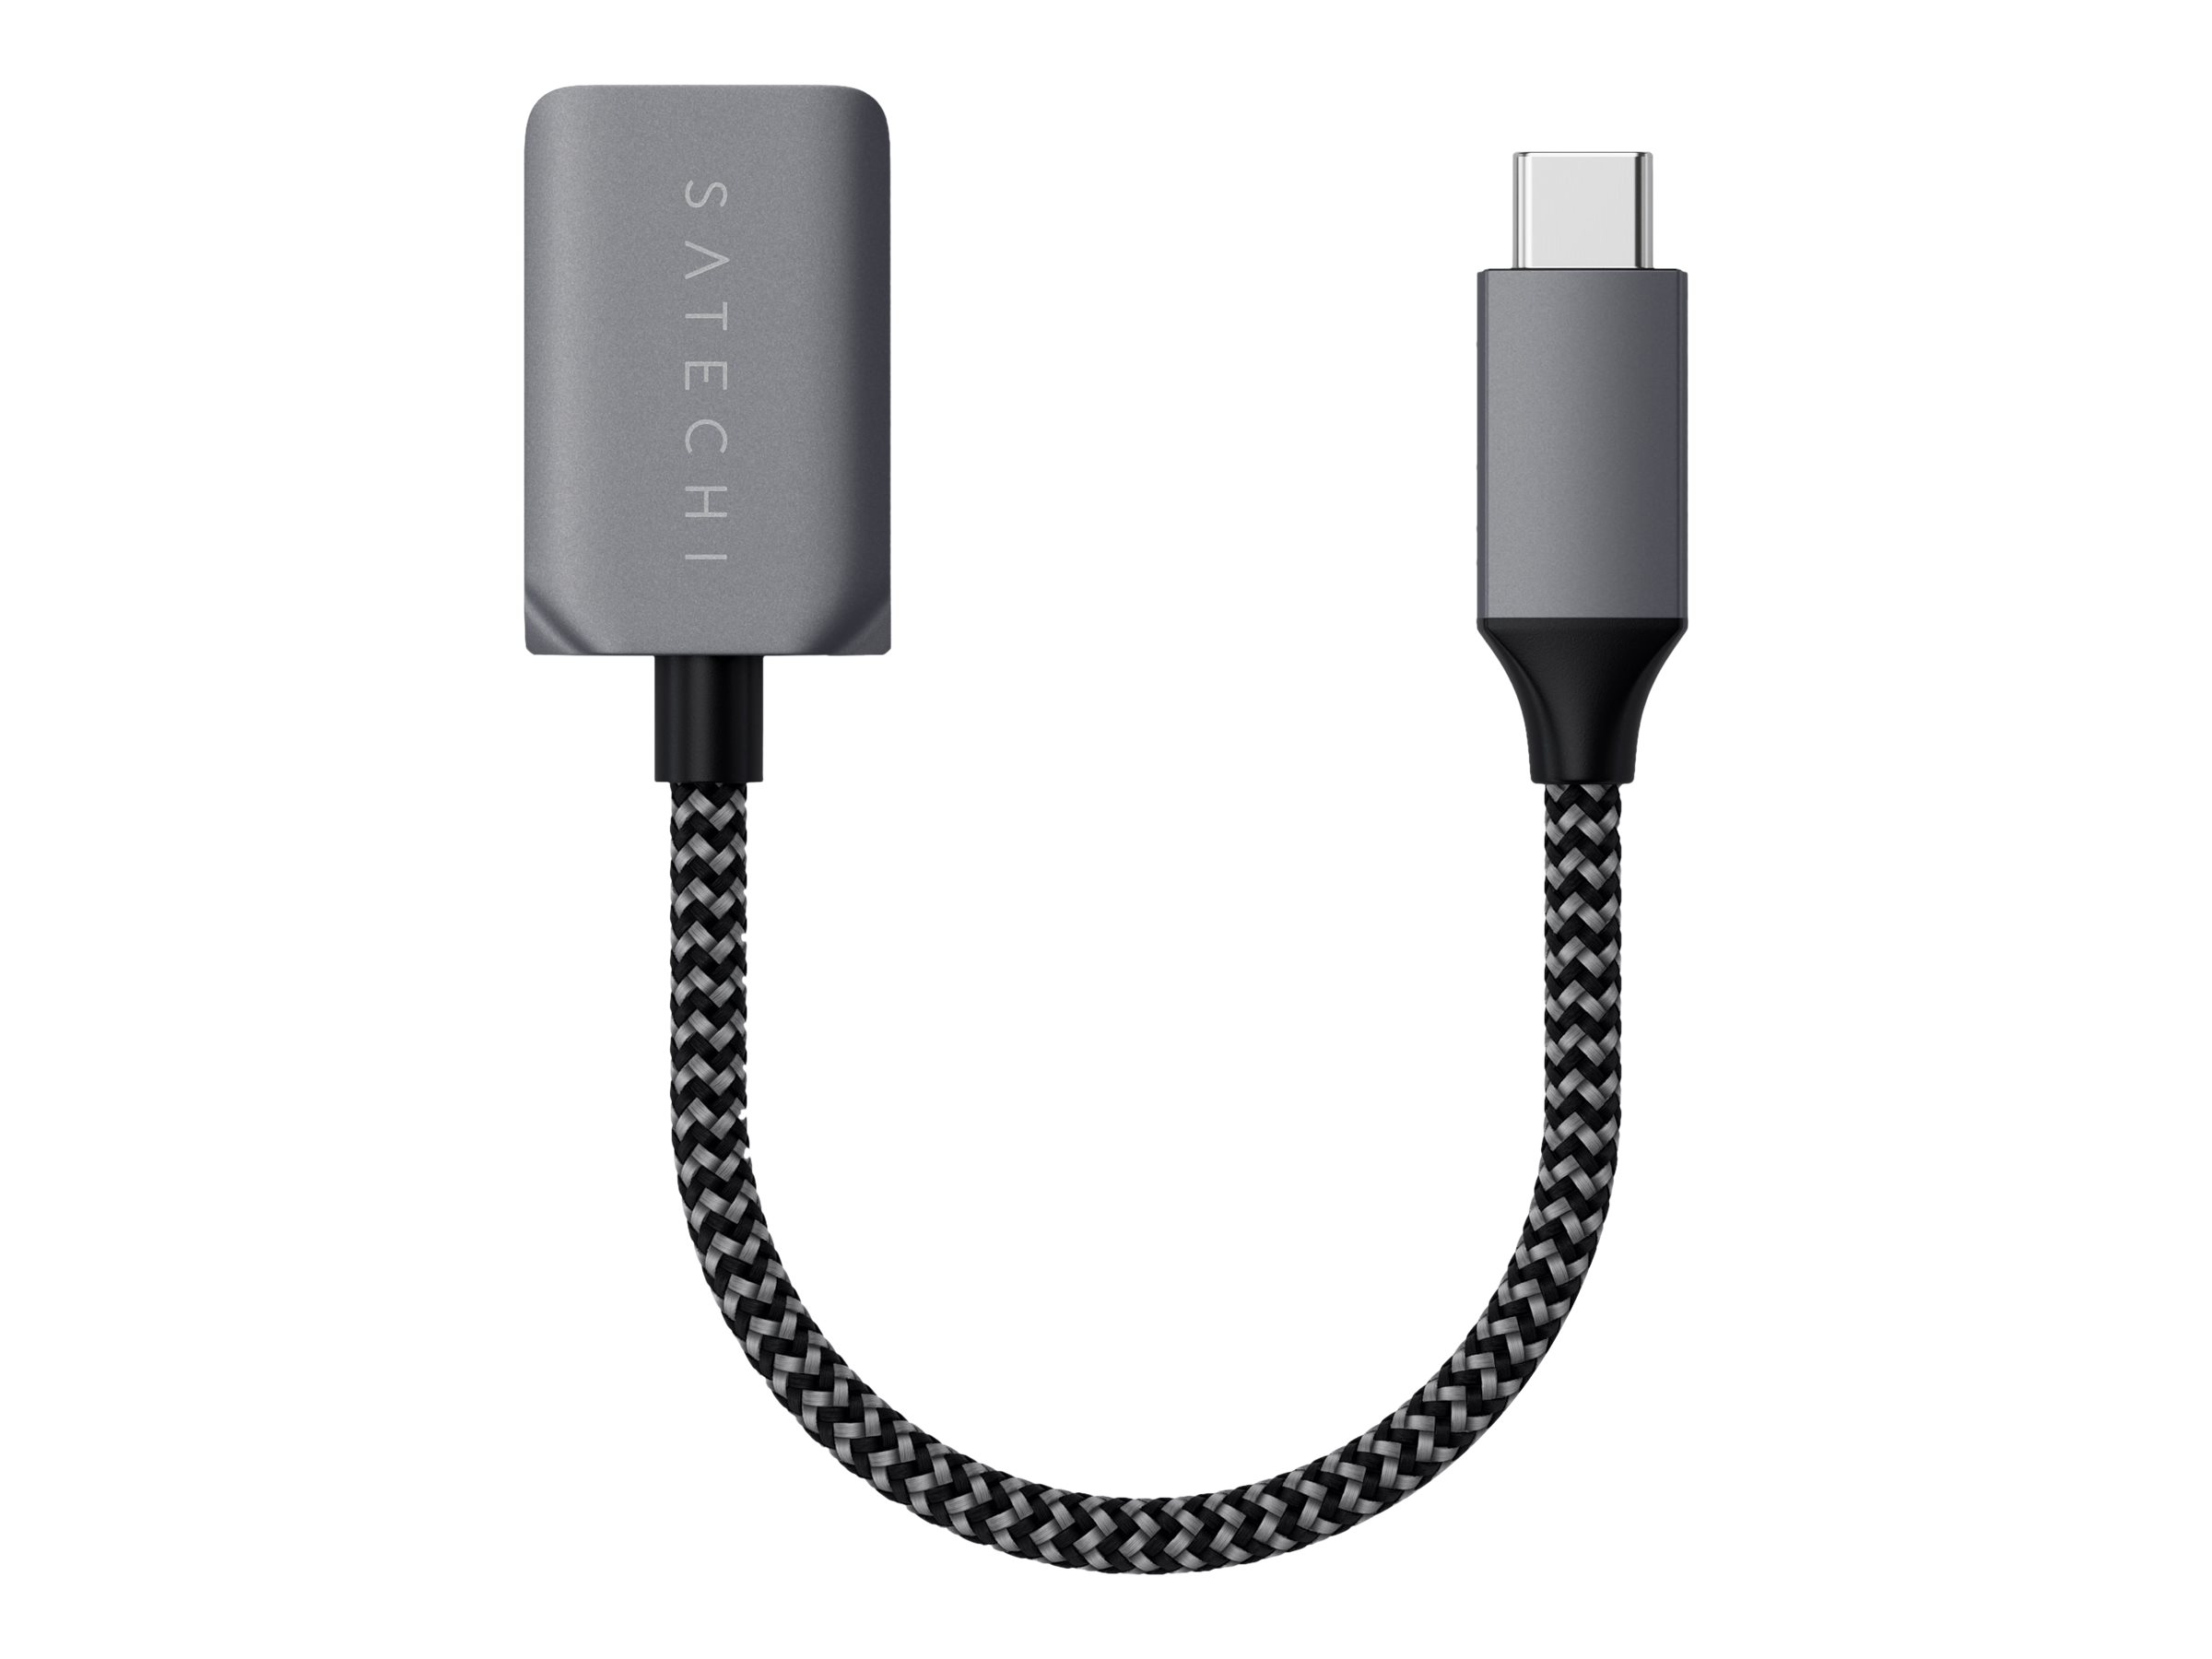 Satechi USB-C to USB-A Adapter